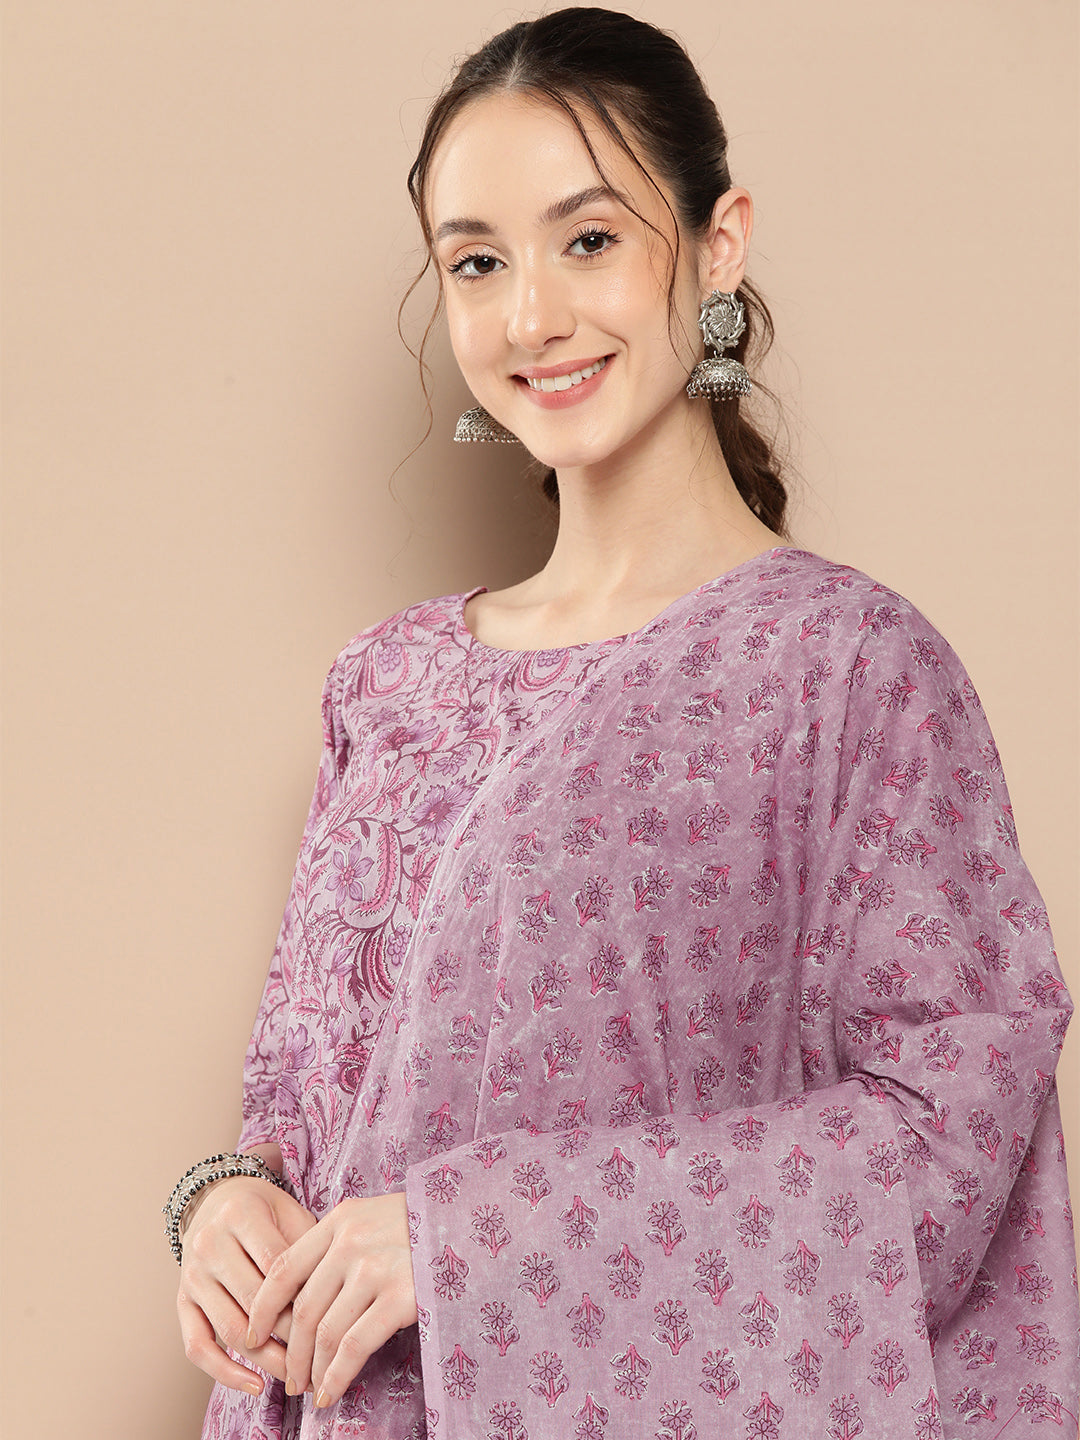 Women's Lavender Floral Printed Kurta With Trouser And Dupatta - Nayo Clothing